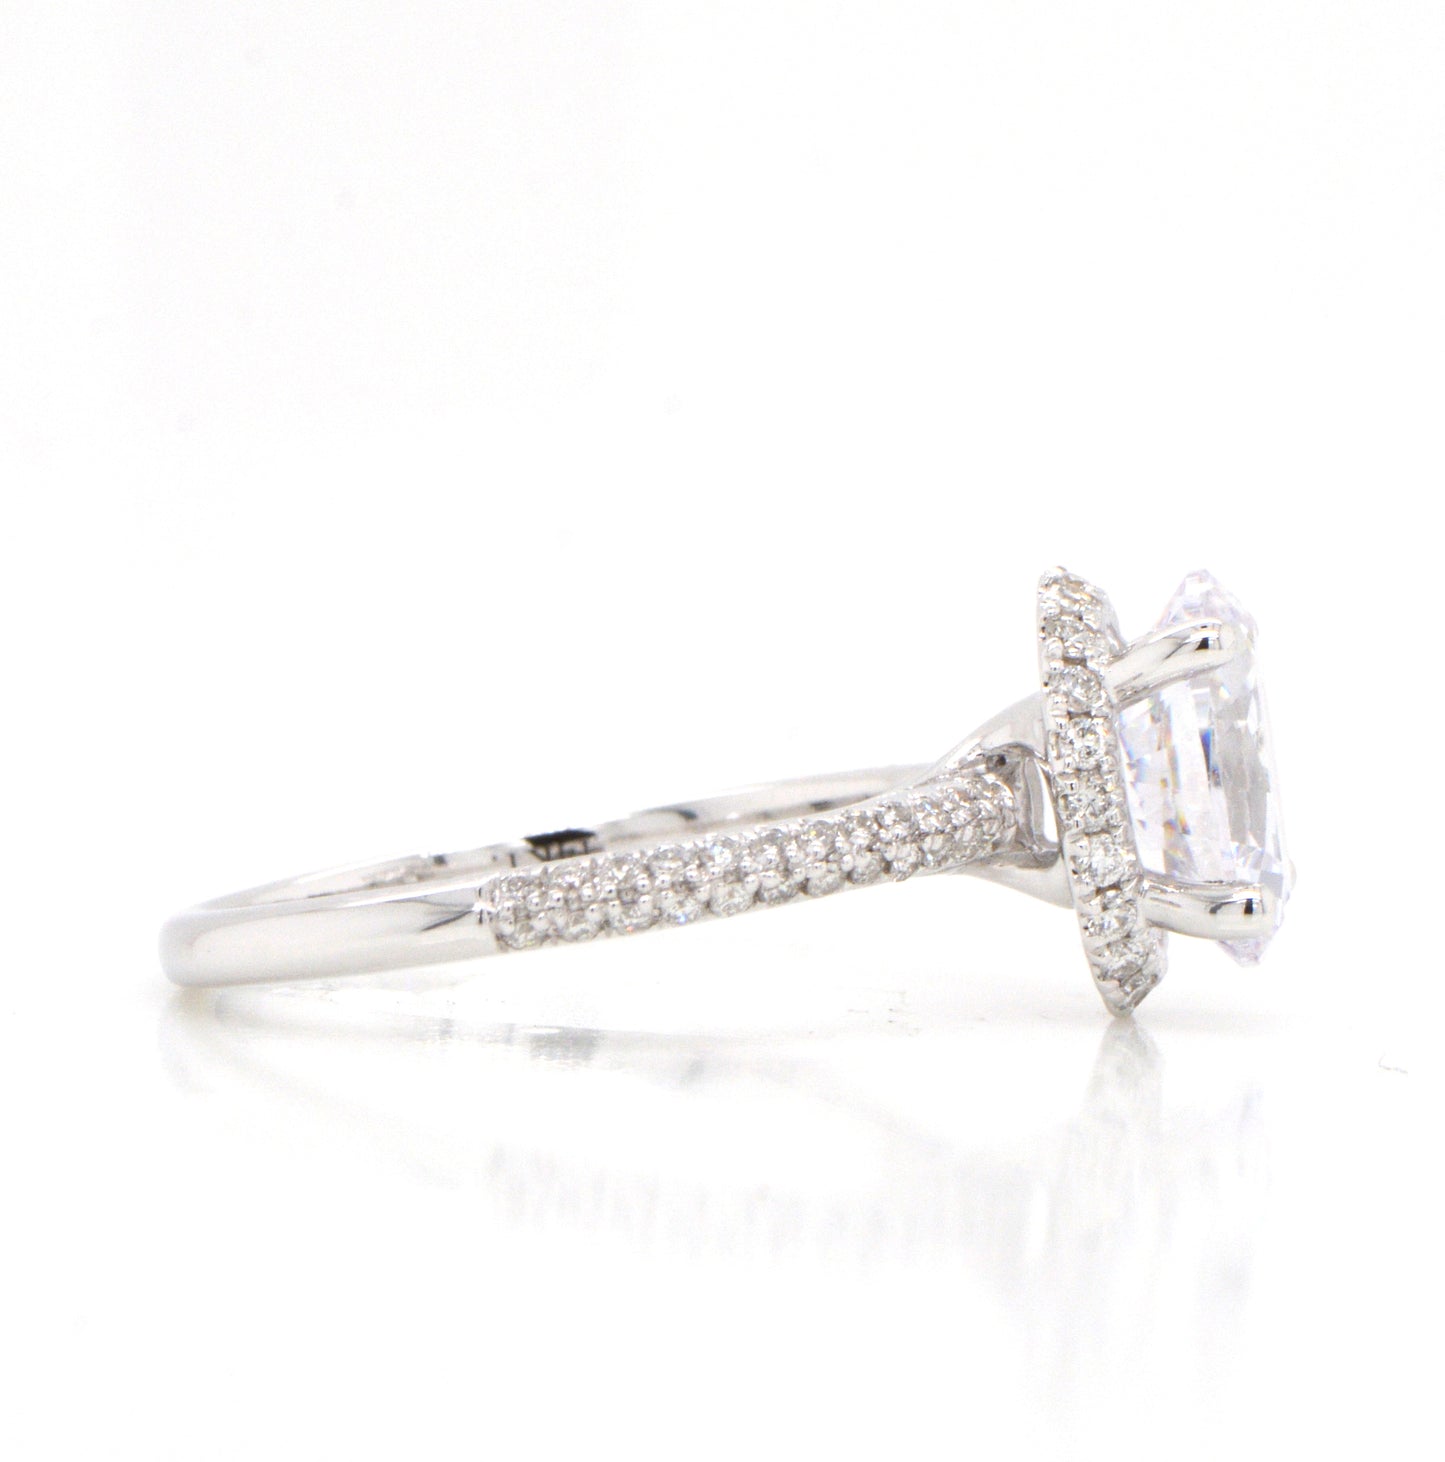 14K White Gold Diamond Engagement Ring with Knife Edge Pave Shoulders